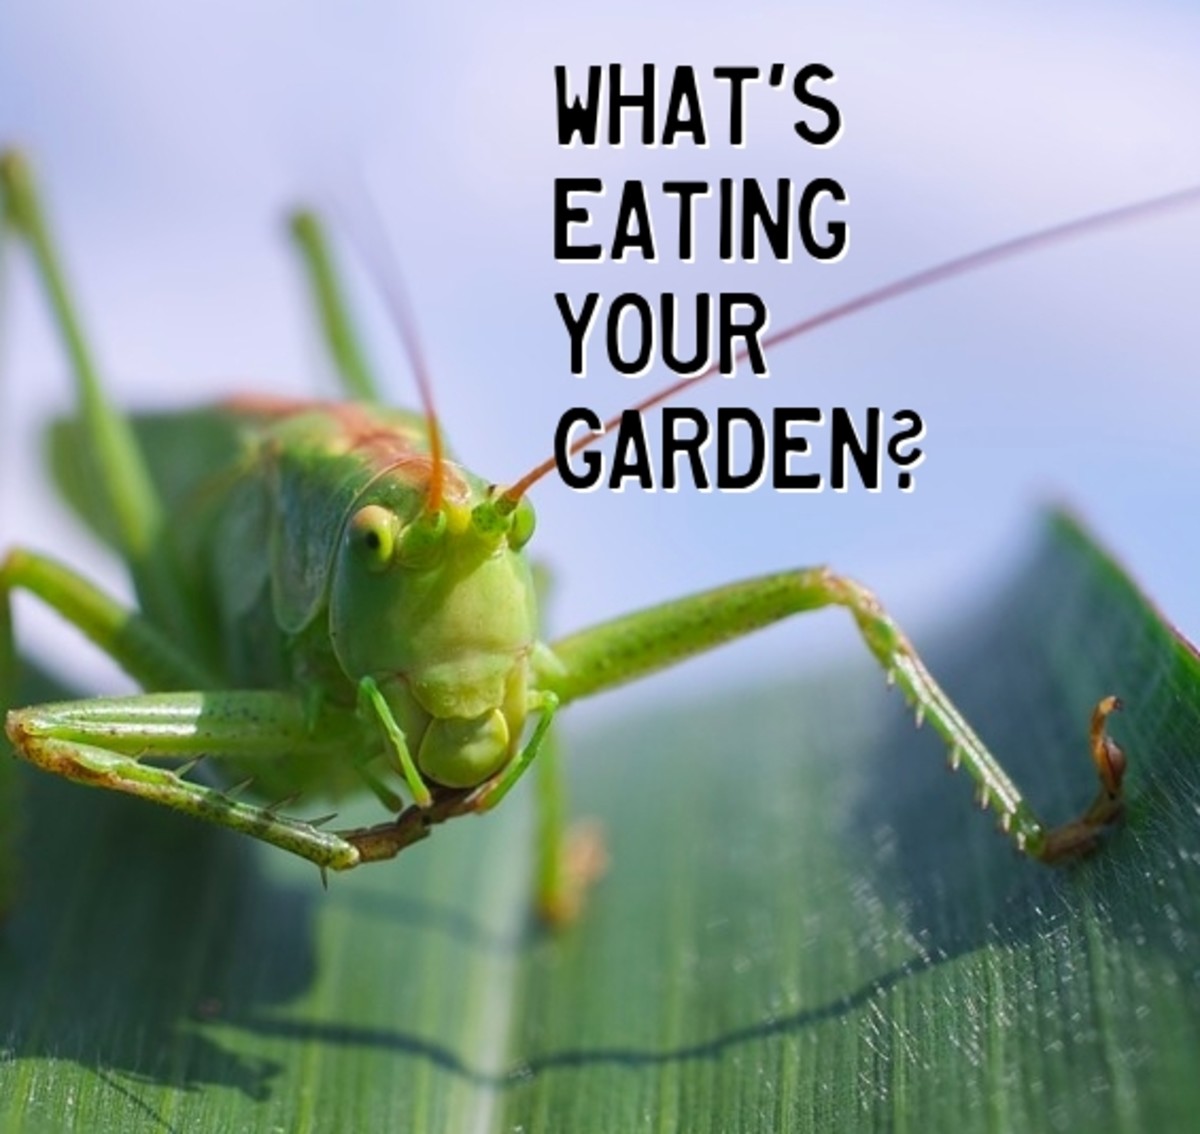 whats-eating-your-garden-leaves